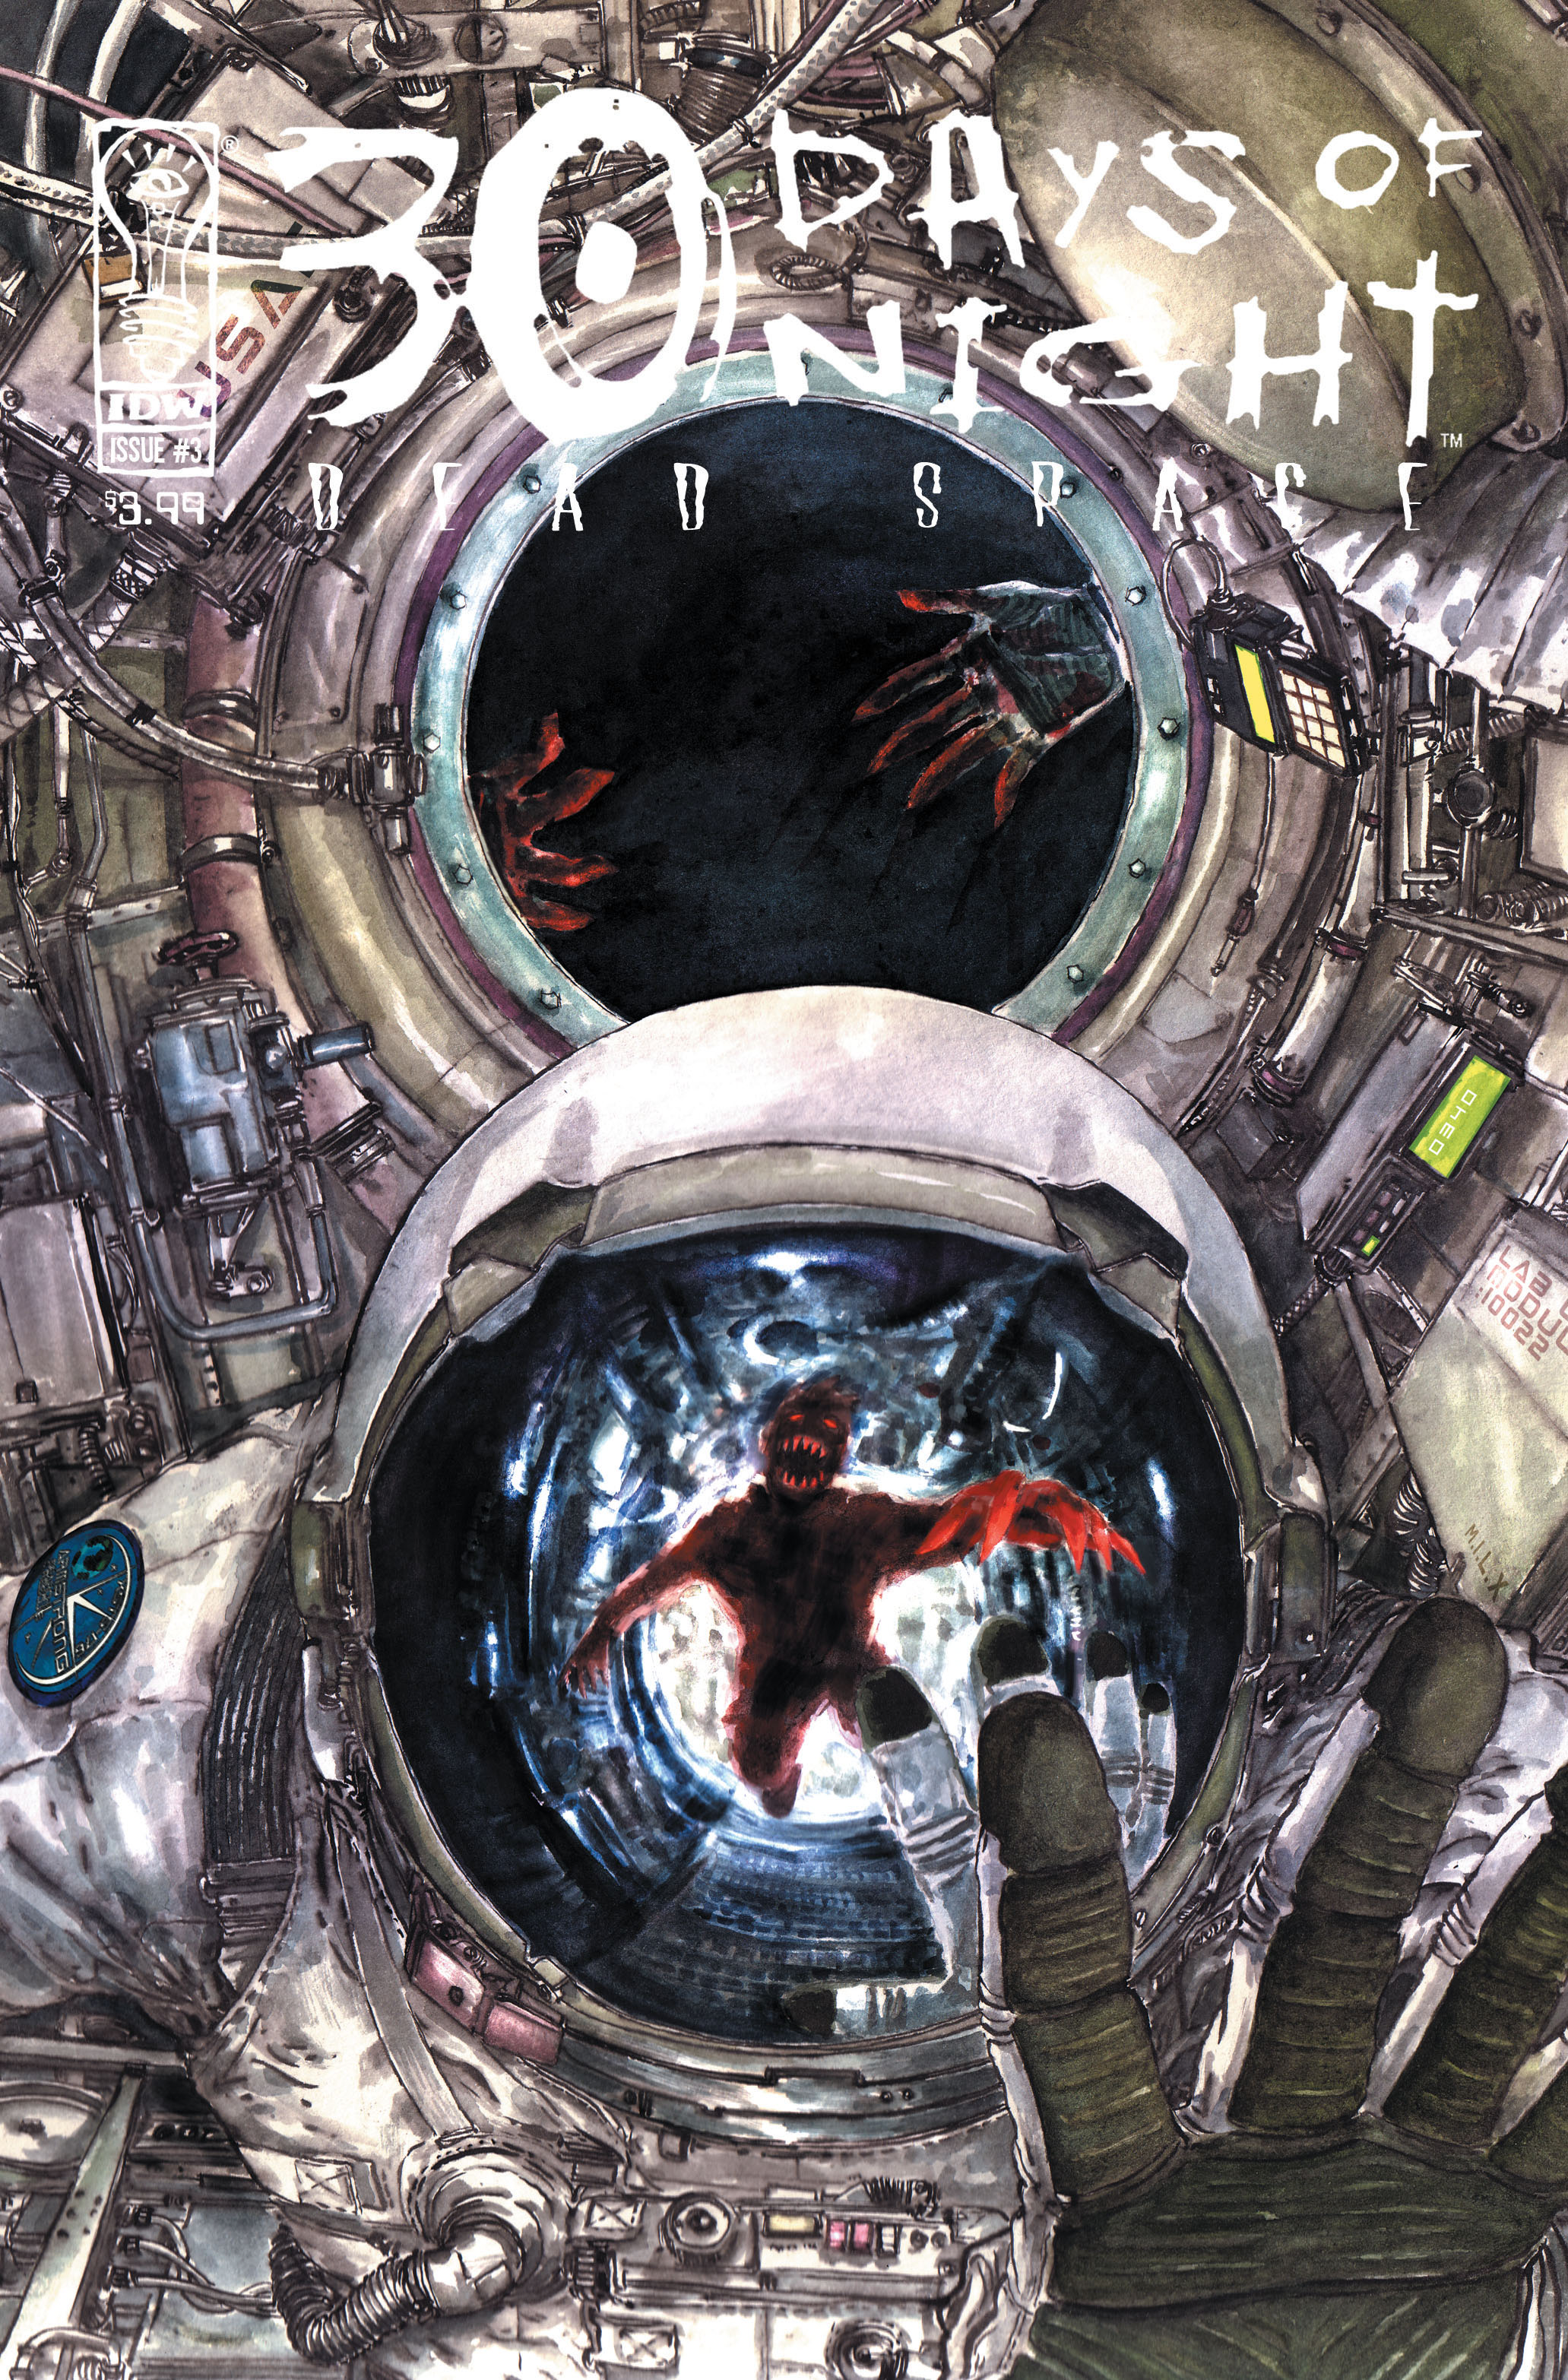 30 Days Of Night Dead Space Issue 3 | Read 30 Days Of Night Dead Space  Issue 3 comic online in high quality. Read Full Comic online for free -  Read comics online in high quality .